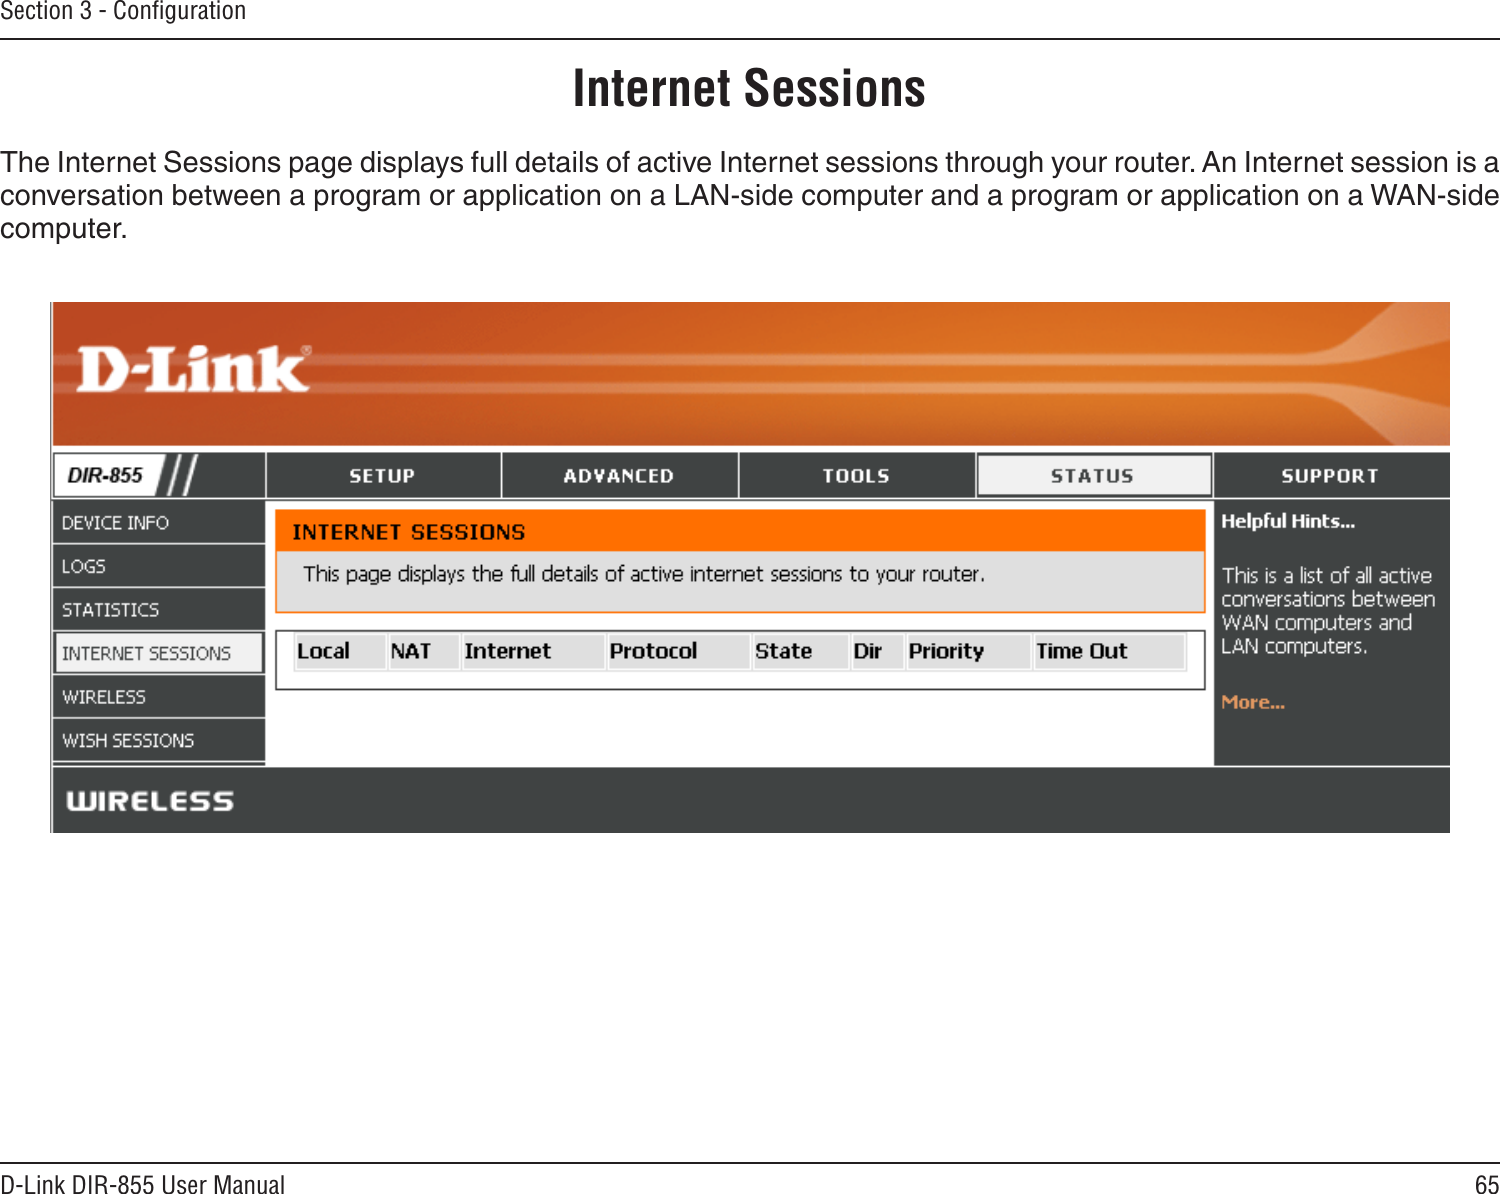 65D-Link DIR-855 User ManualSection 3 - ConﬁgurationInternet SessionsThe Internet Sessions page displays full details of active Internet sessions through your router. An Internet session is a conversation between a program or application on a LAN-side computer and a program or application on a WAN-side computer. 